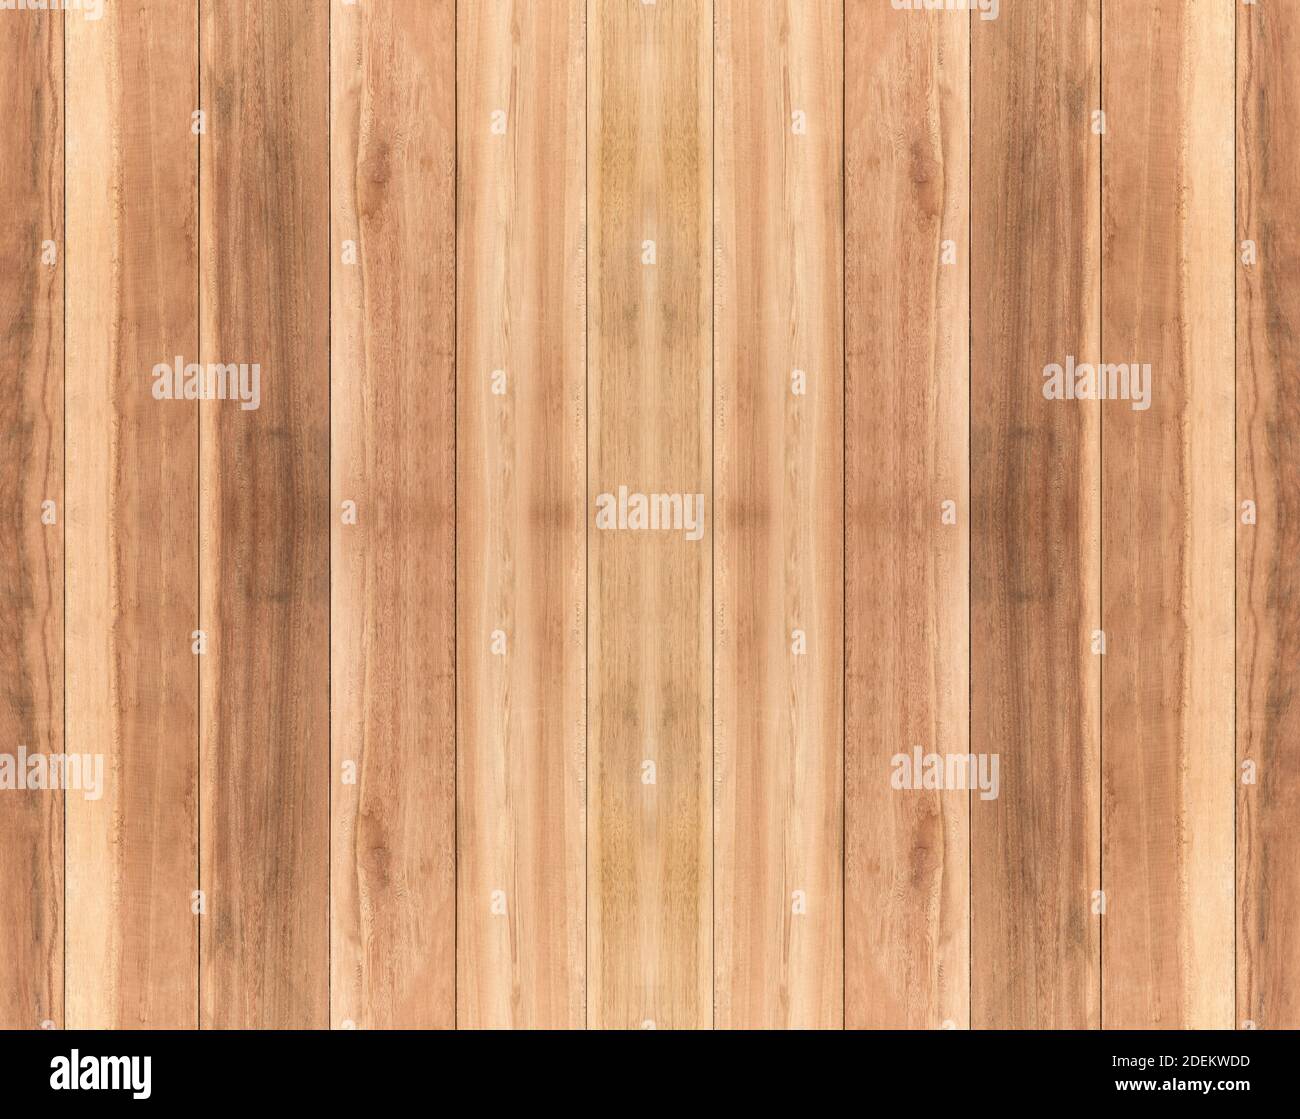 Wooden plank or board background with natural wood grain as part of wall or table top Stock Photo